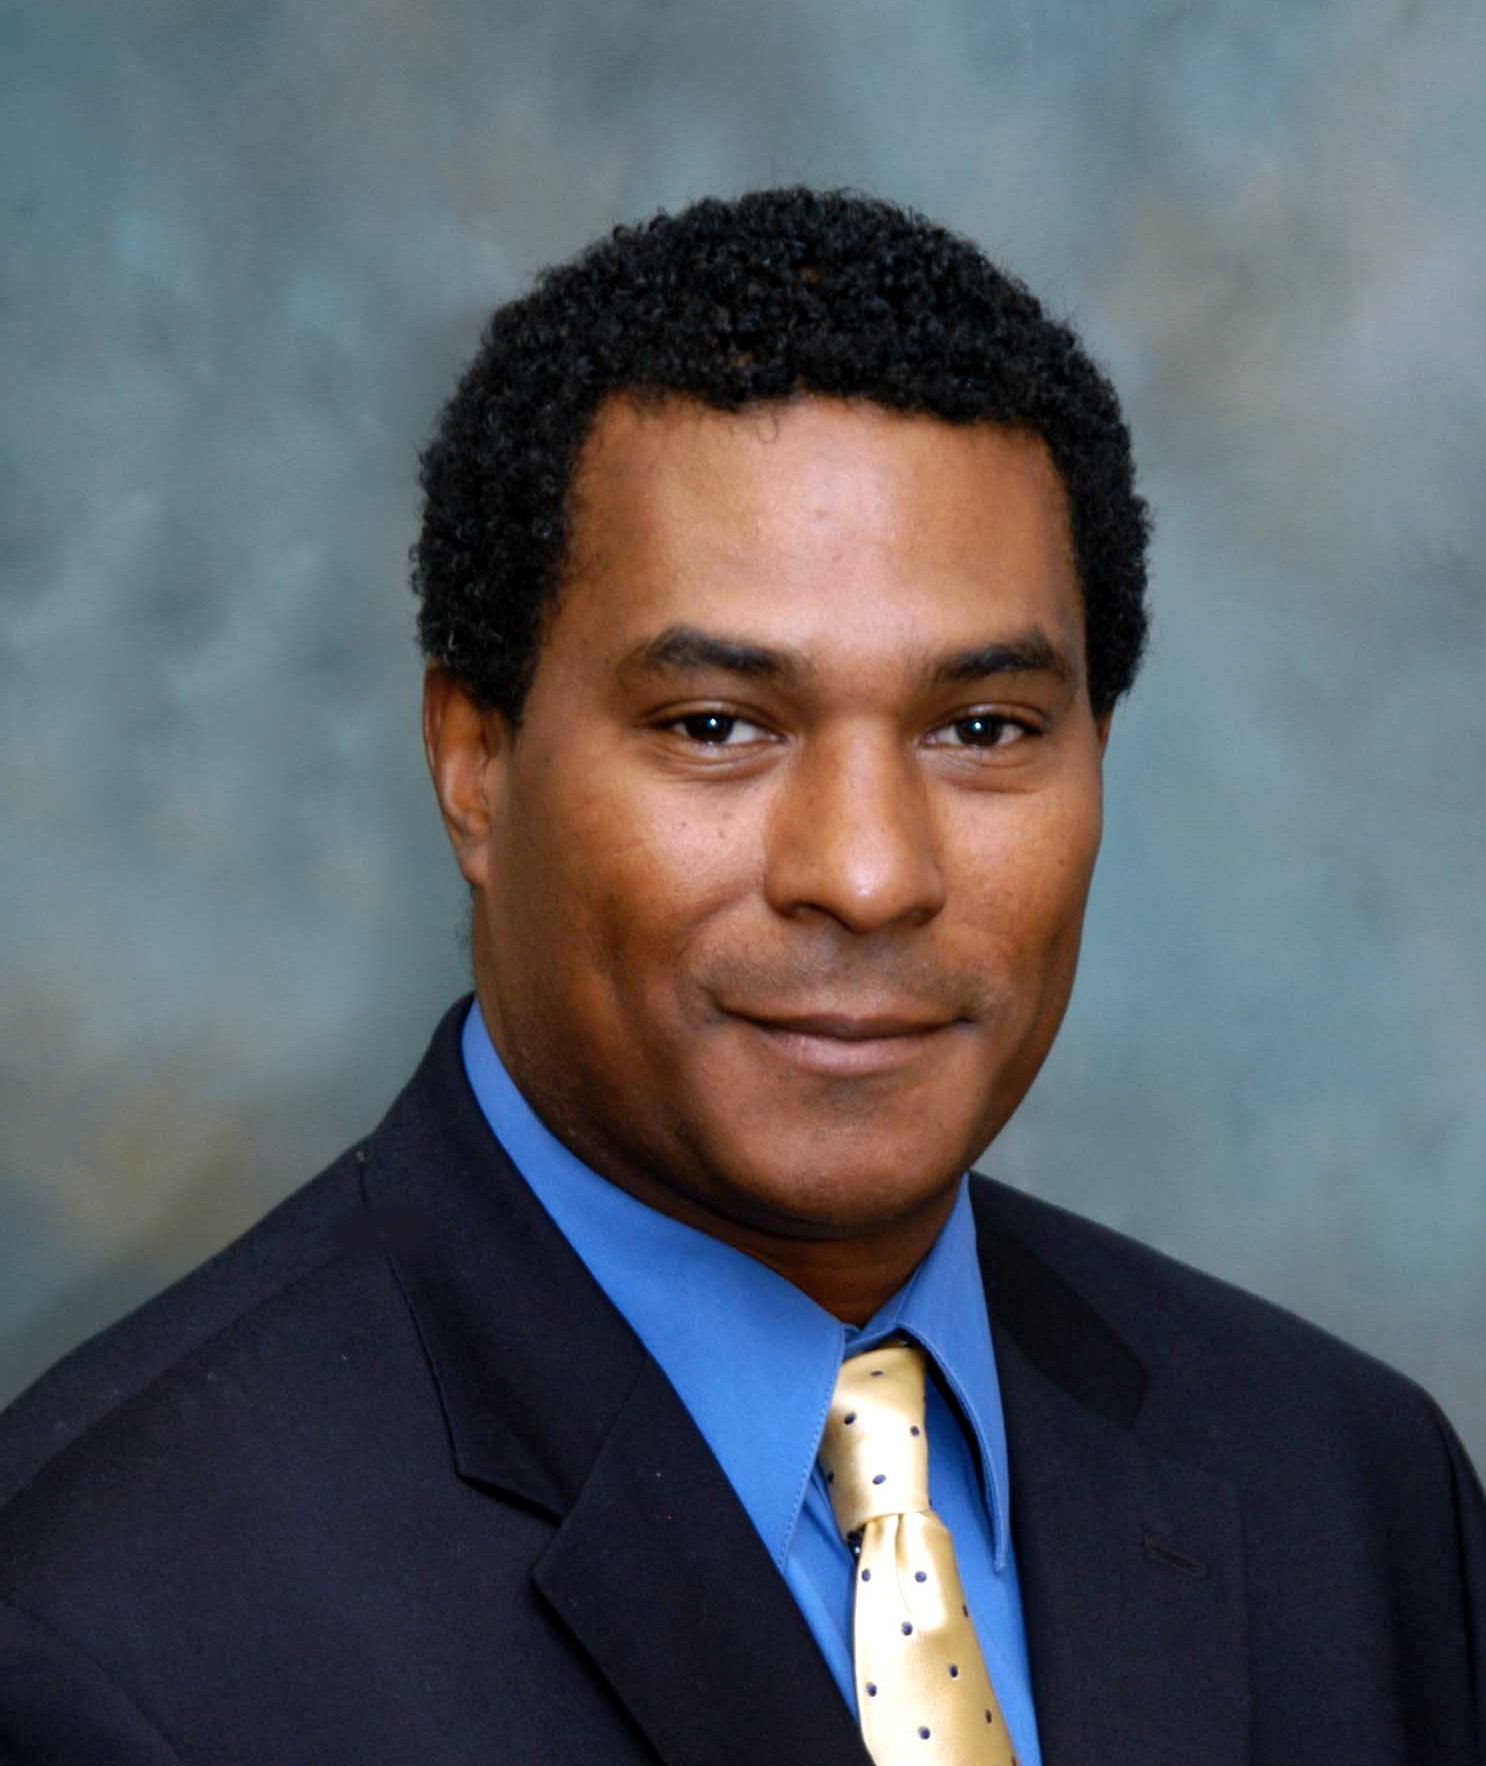 Lawrence “LB” Brown, associate dean of Chapman University’s new School of Pharmacy, has been elected president of the American Pharmacists Association.